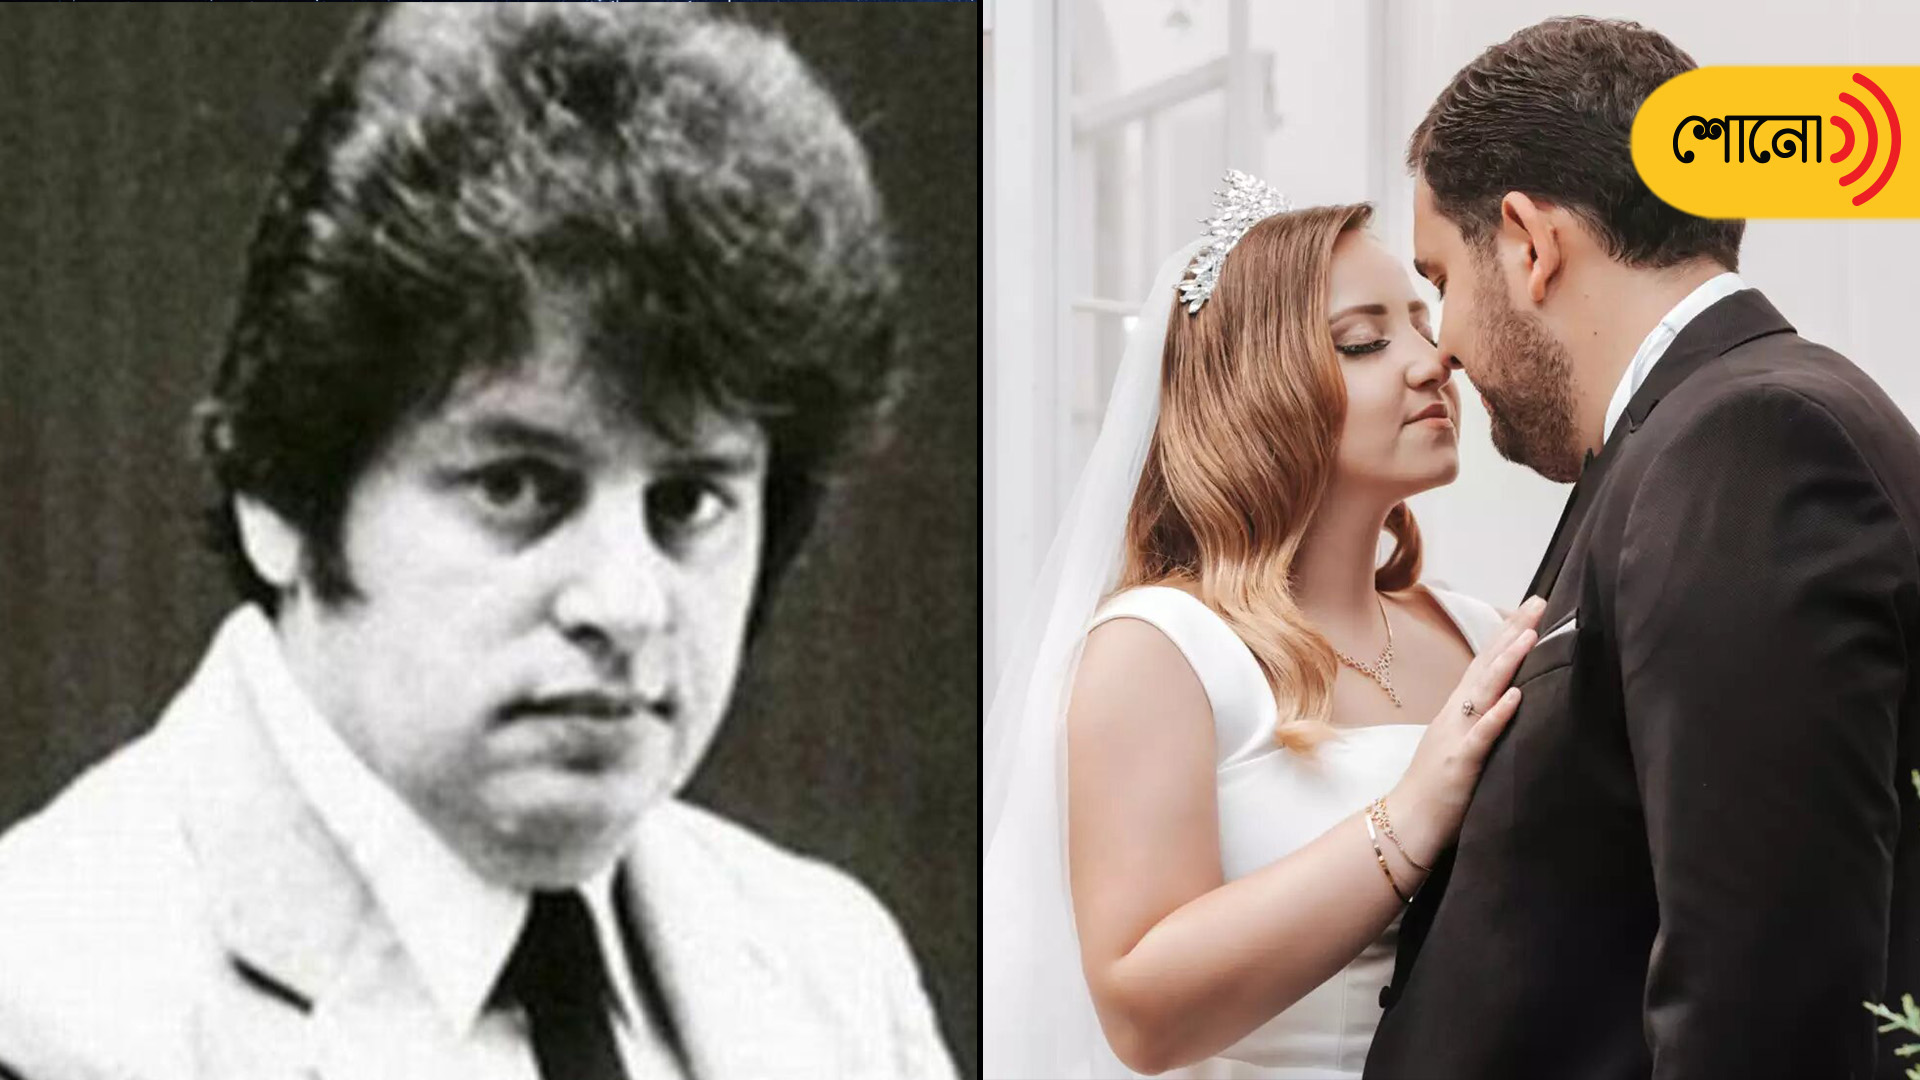 know more about the US Man Who Married More Than 100 Women In 3 Decades